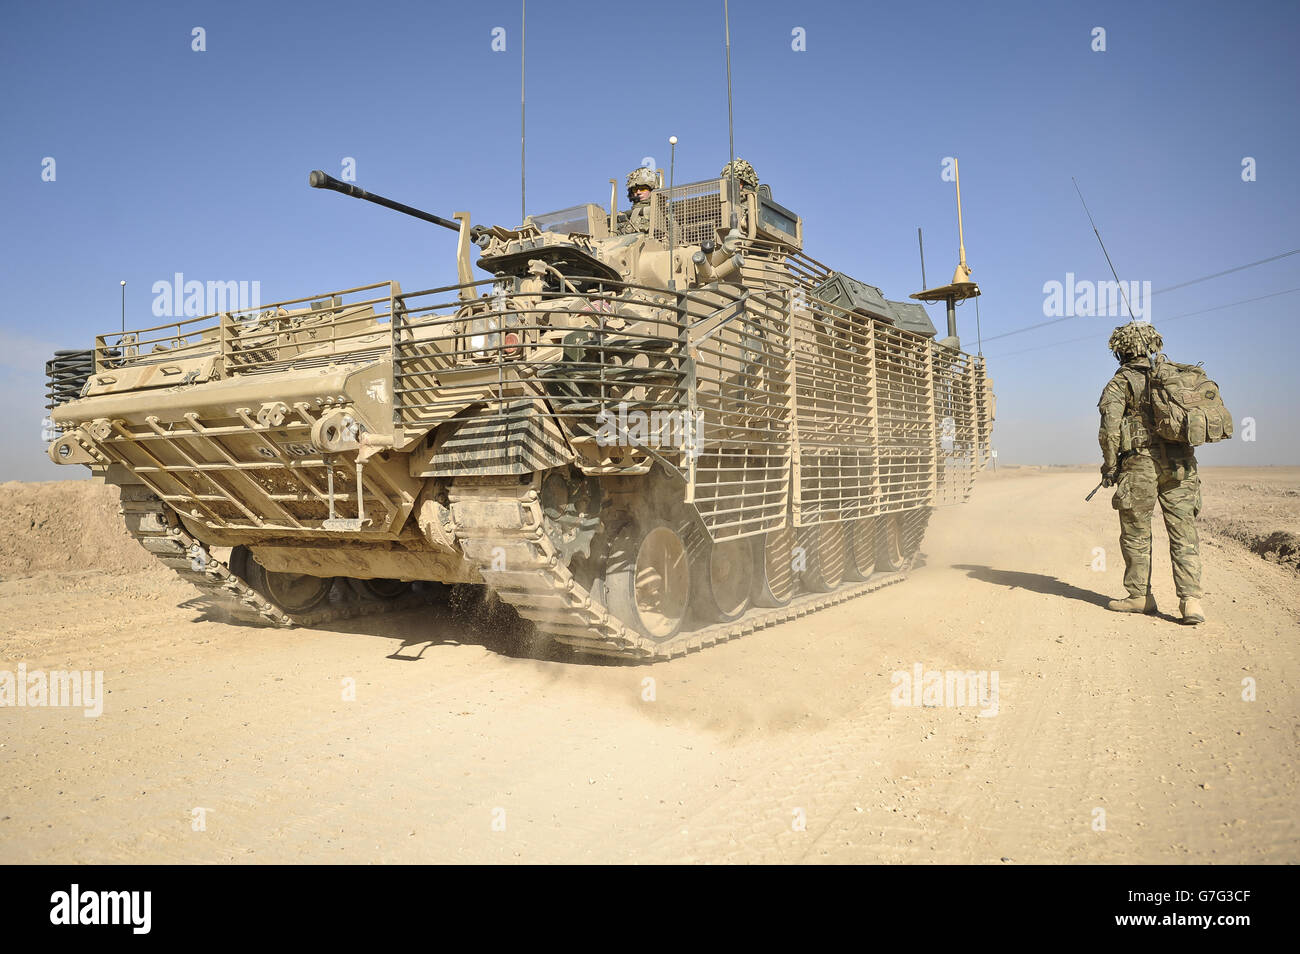 A Warrior tracked armoured vehicle on patrol in Helmand Province, Afghanistan. PRESS ASSOCIATION Photo. Picture date: Friday December, 20, 2013. Photo credit should read: Ben Birchall Stock Photo